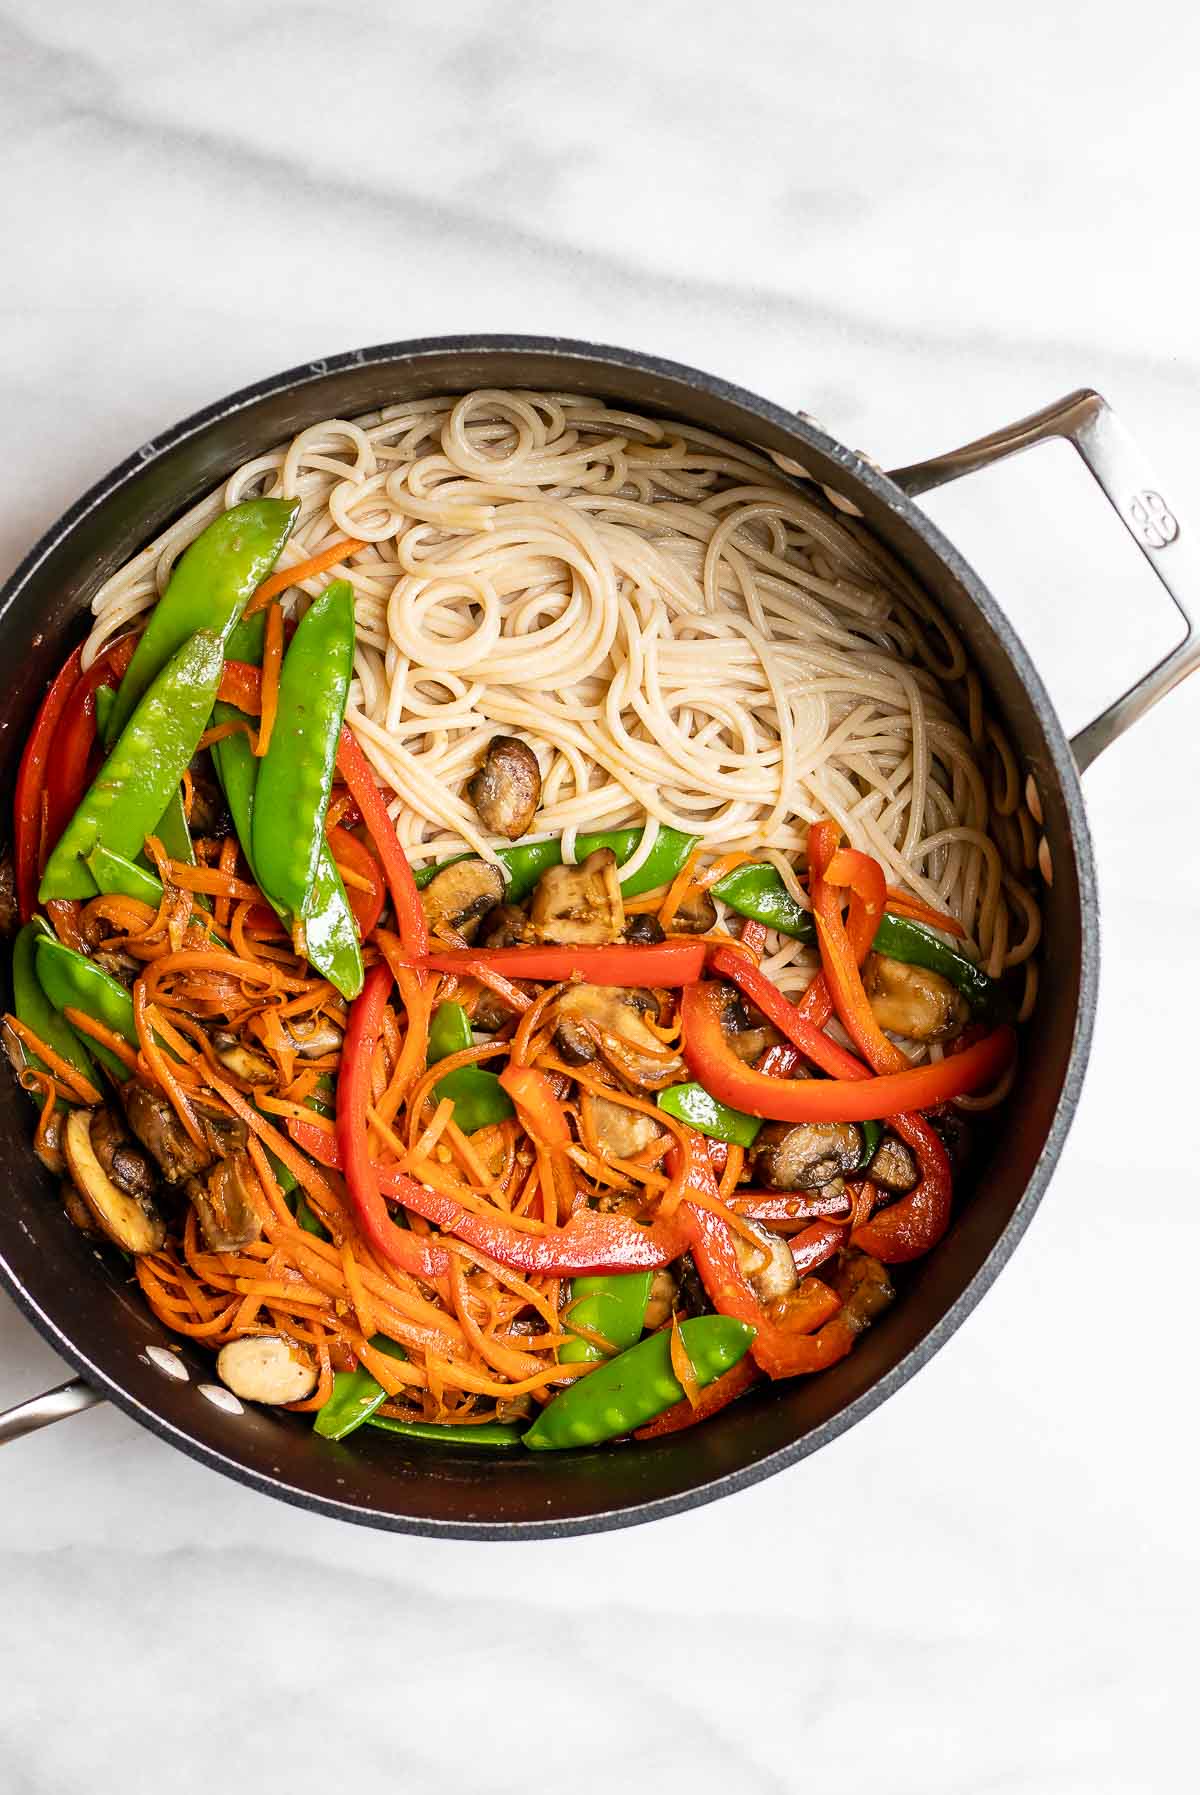 Cooked noodles and vegetables in a pot before getting mixed together.